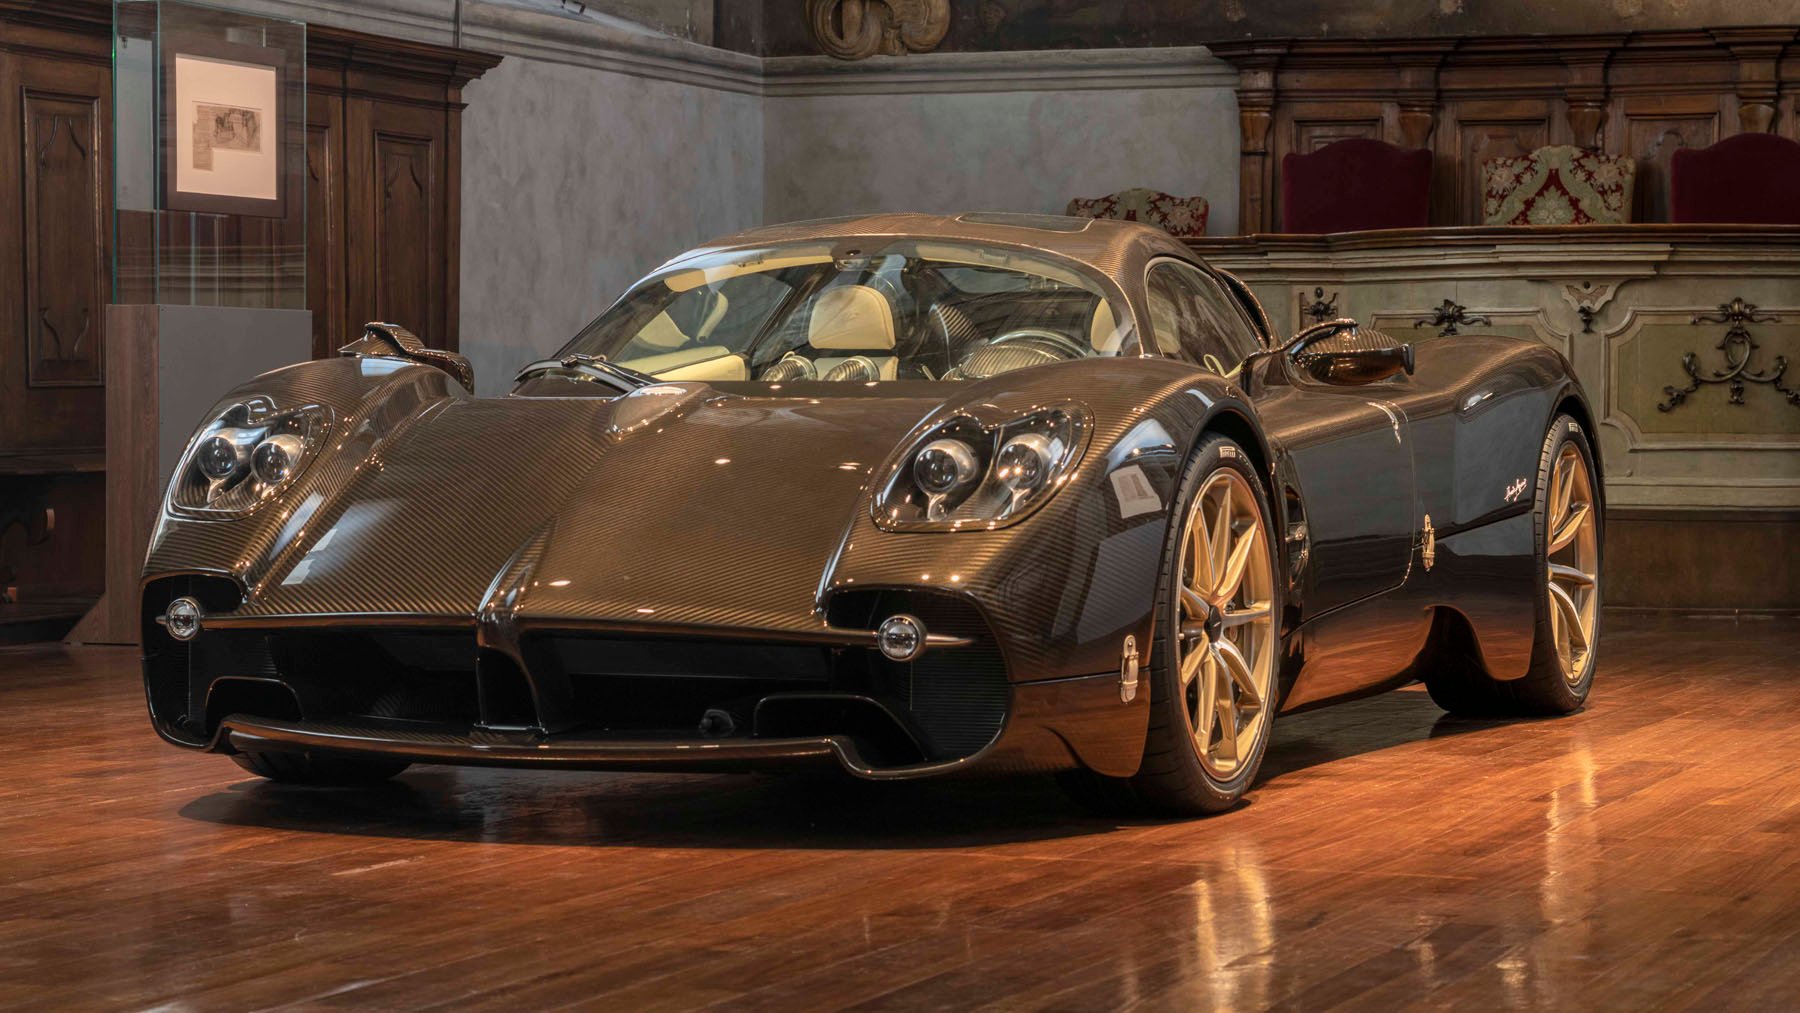 Does the new Pagani Utopia look better finished in carbon fibre?